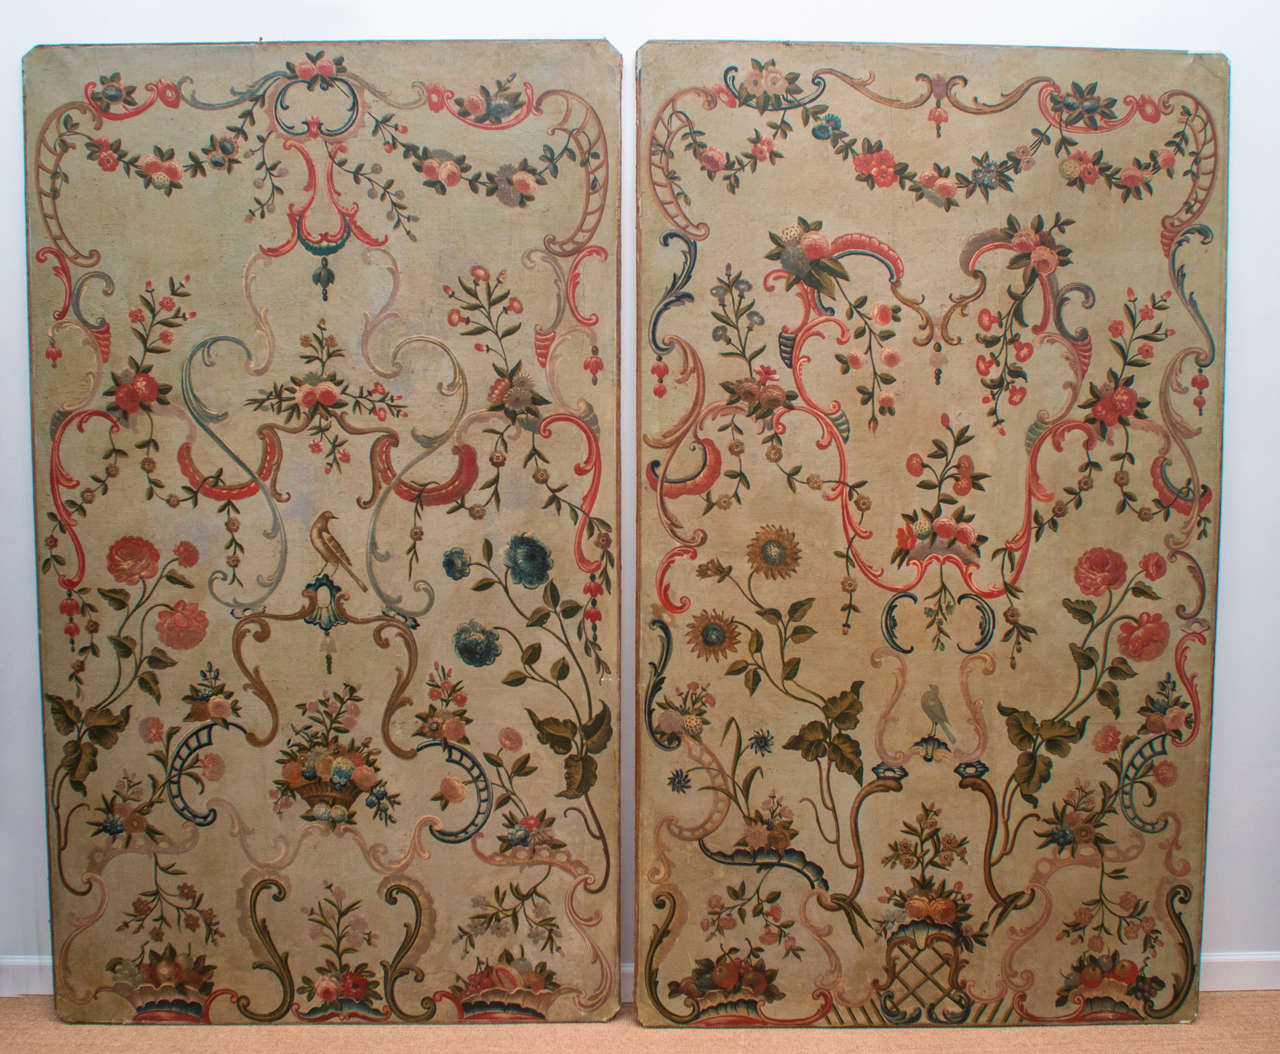 Canvas on wood frame panels, painted in the Rococo style with old celadon background with coral, greens and blue detail

